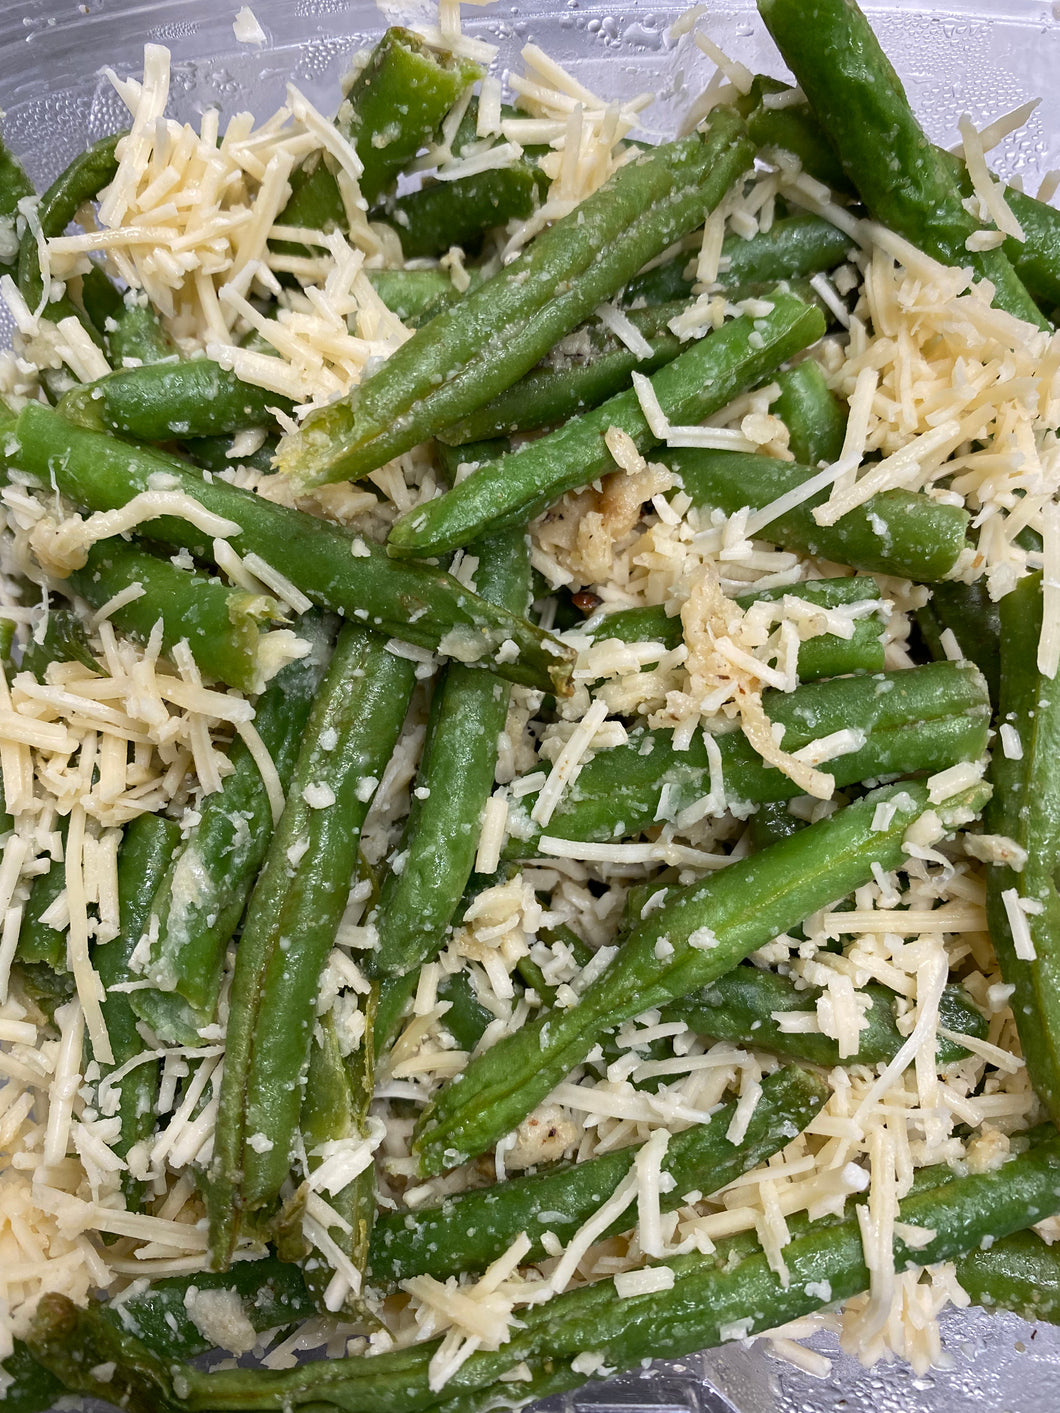 Roasted Parmesan Green Beans - catering (9x13 tray)